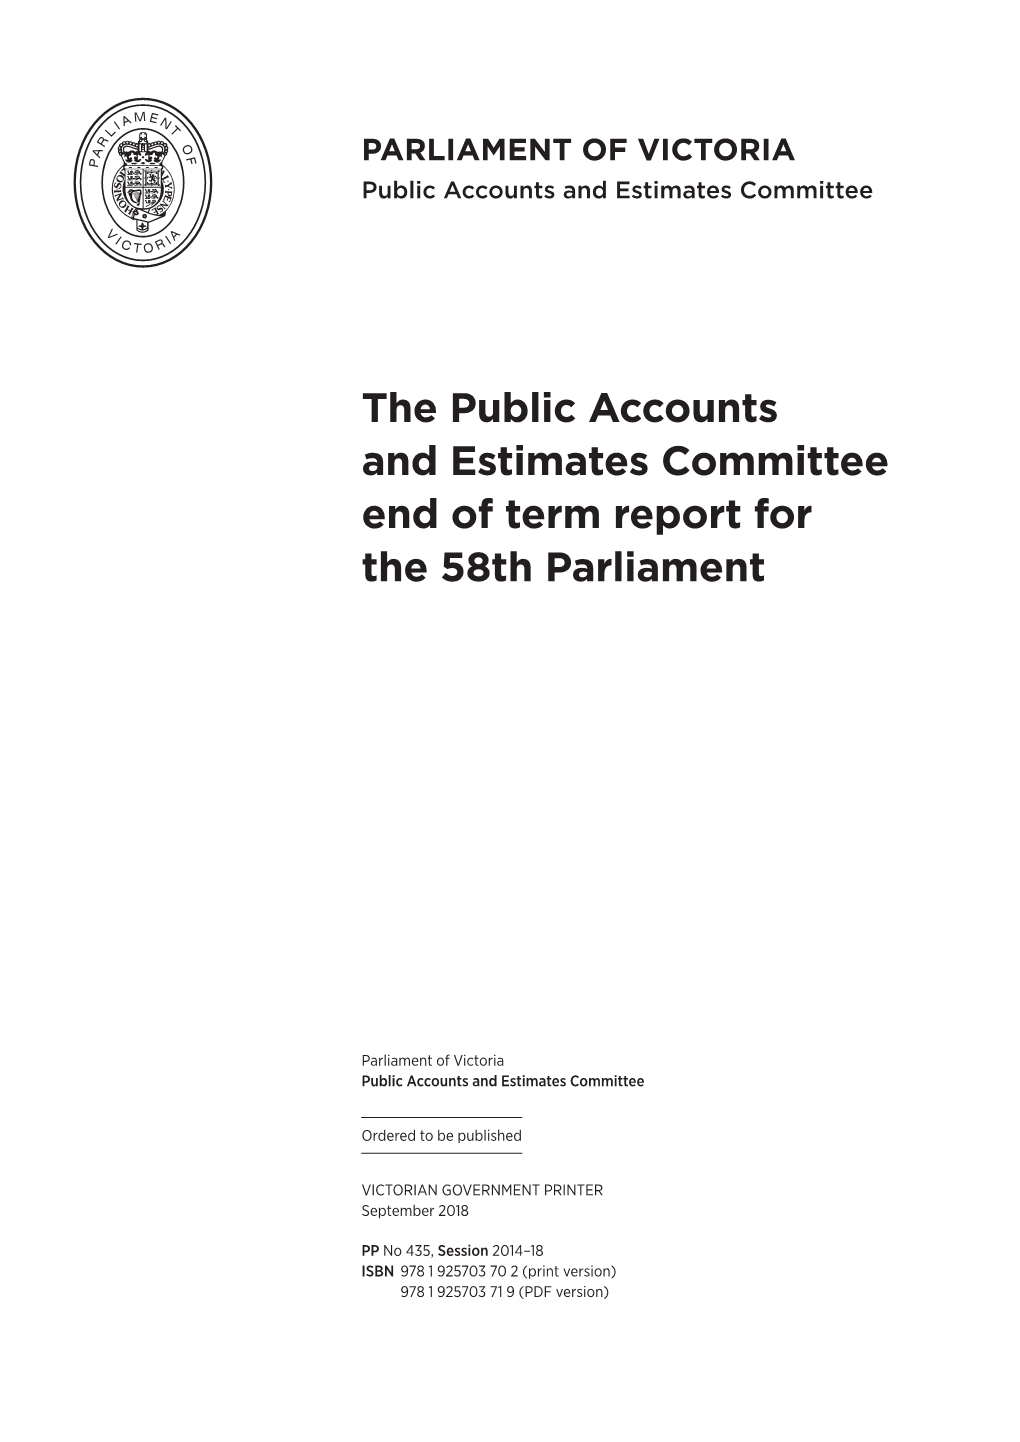 The Public Accounts and Estimates Committee End of Term Report for the 58Th Parliament